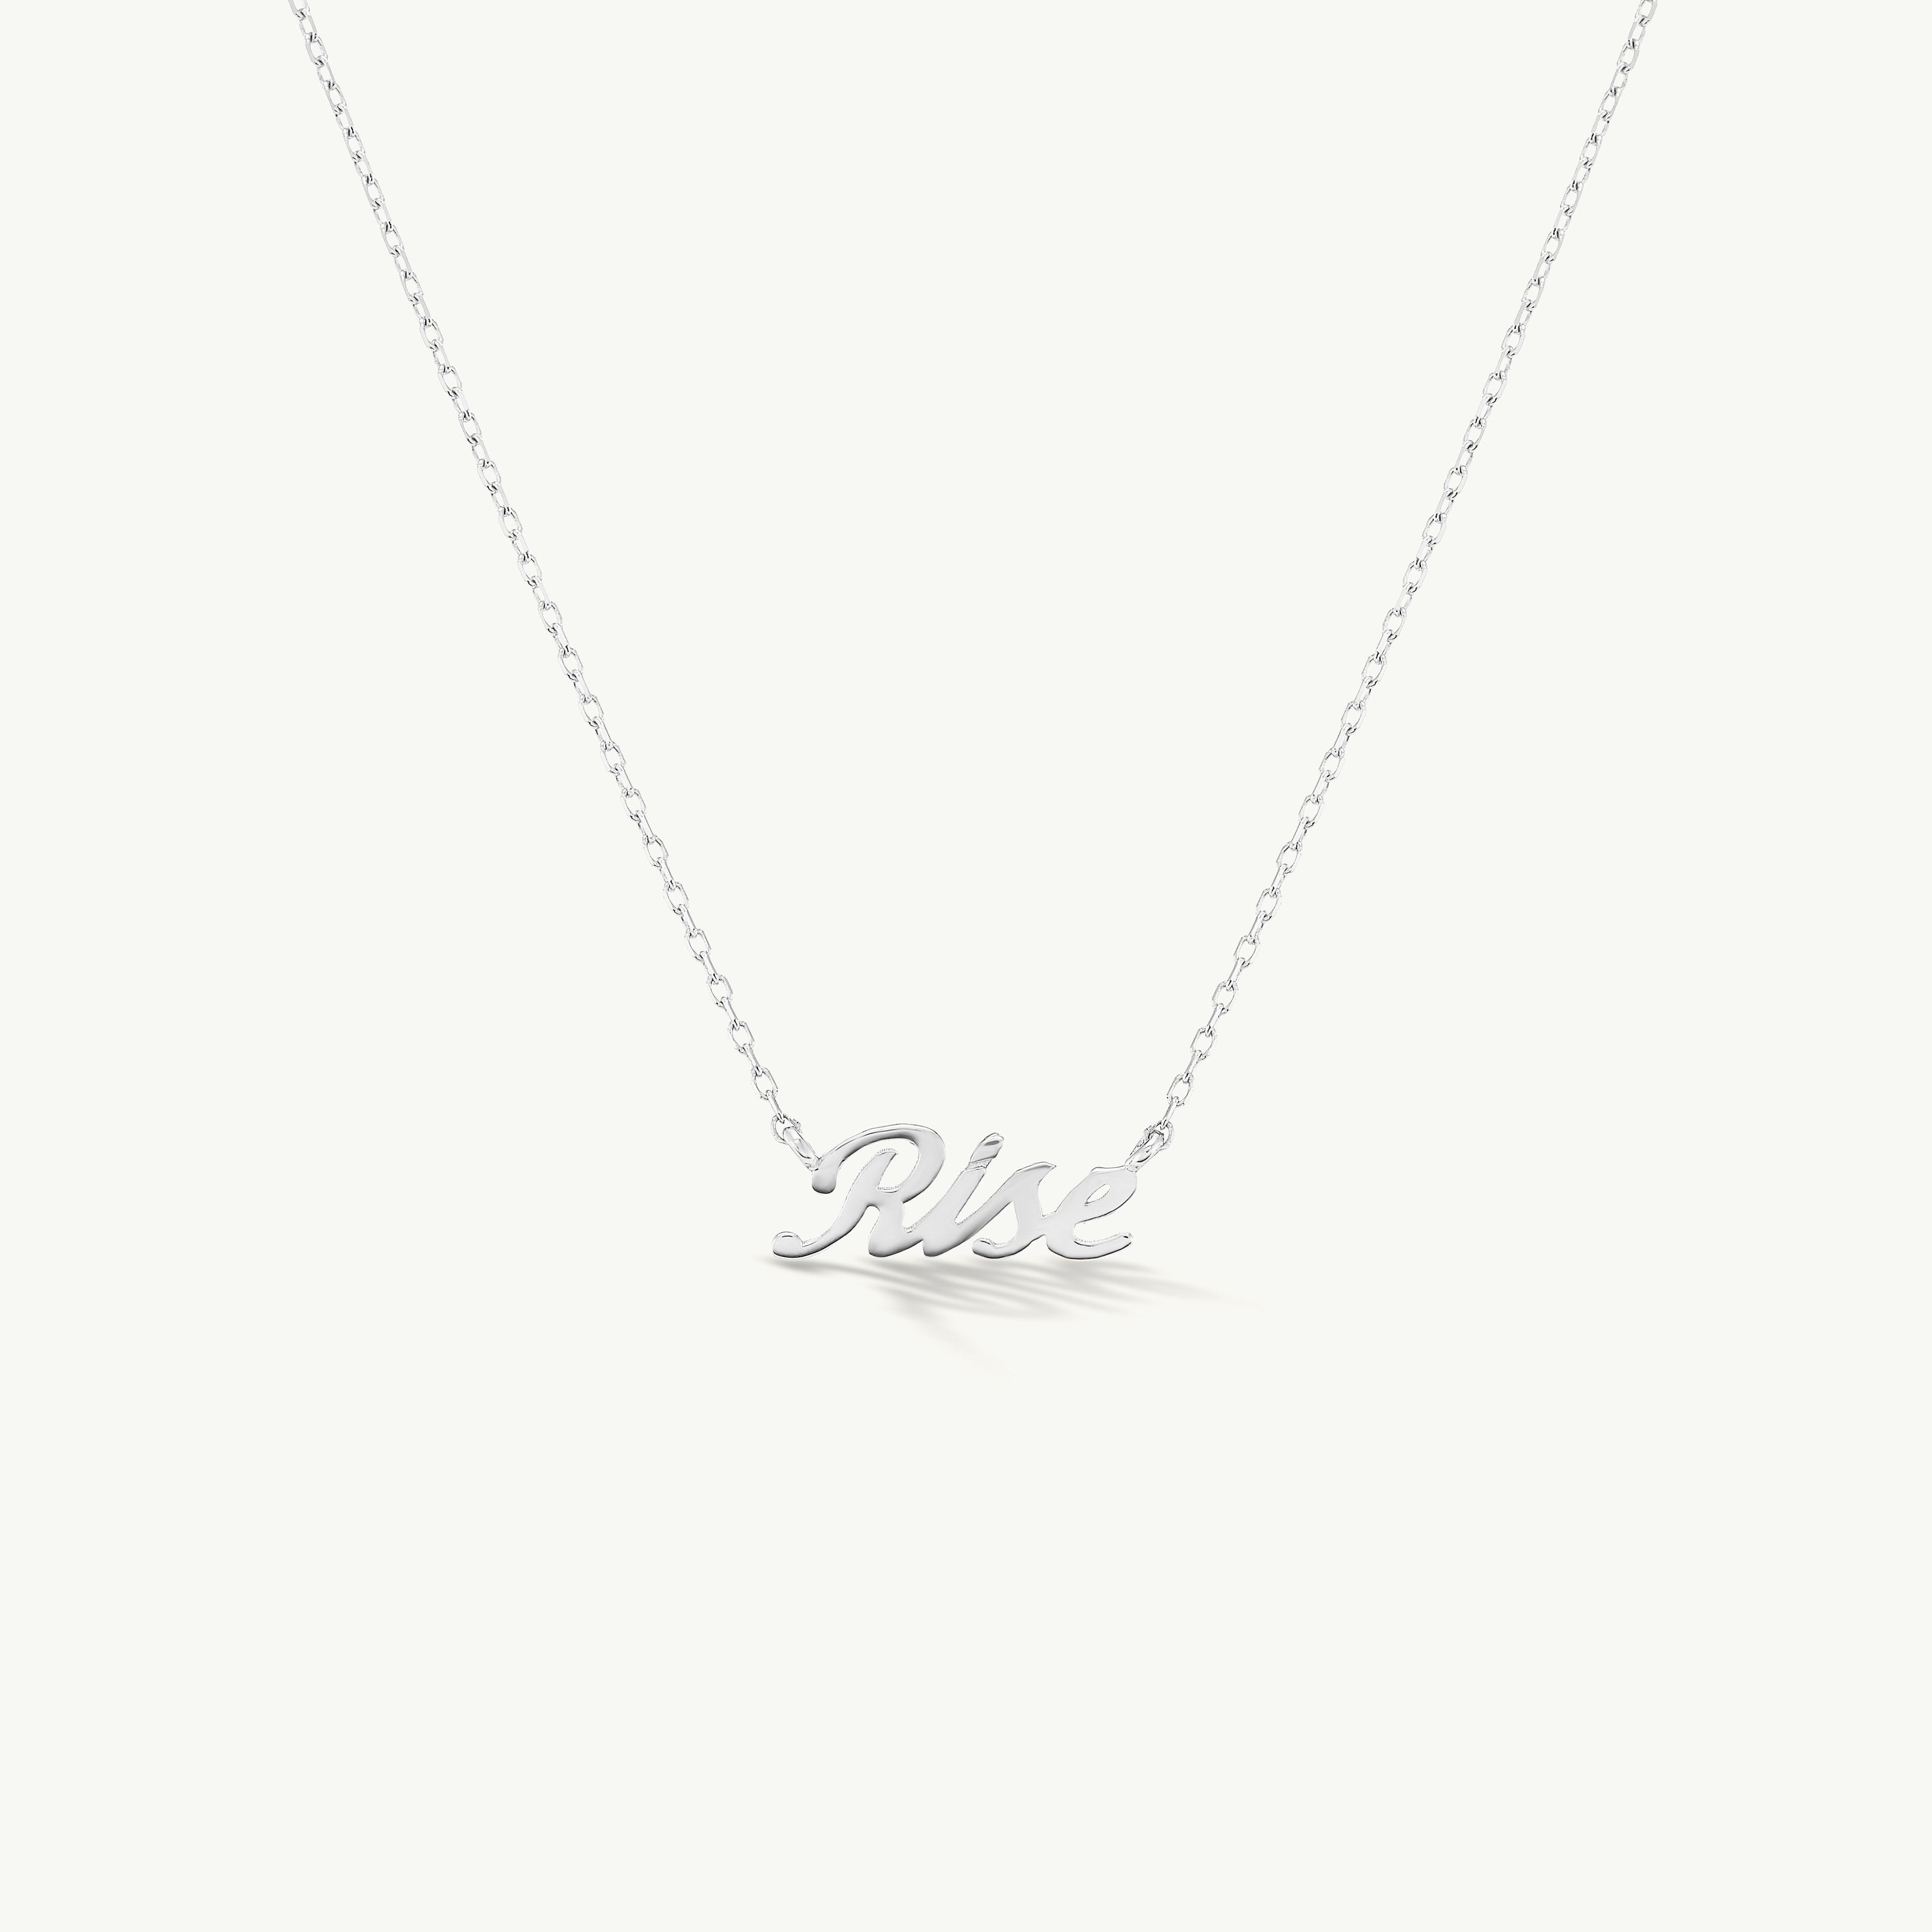 Rise Gold Necklace